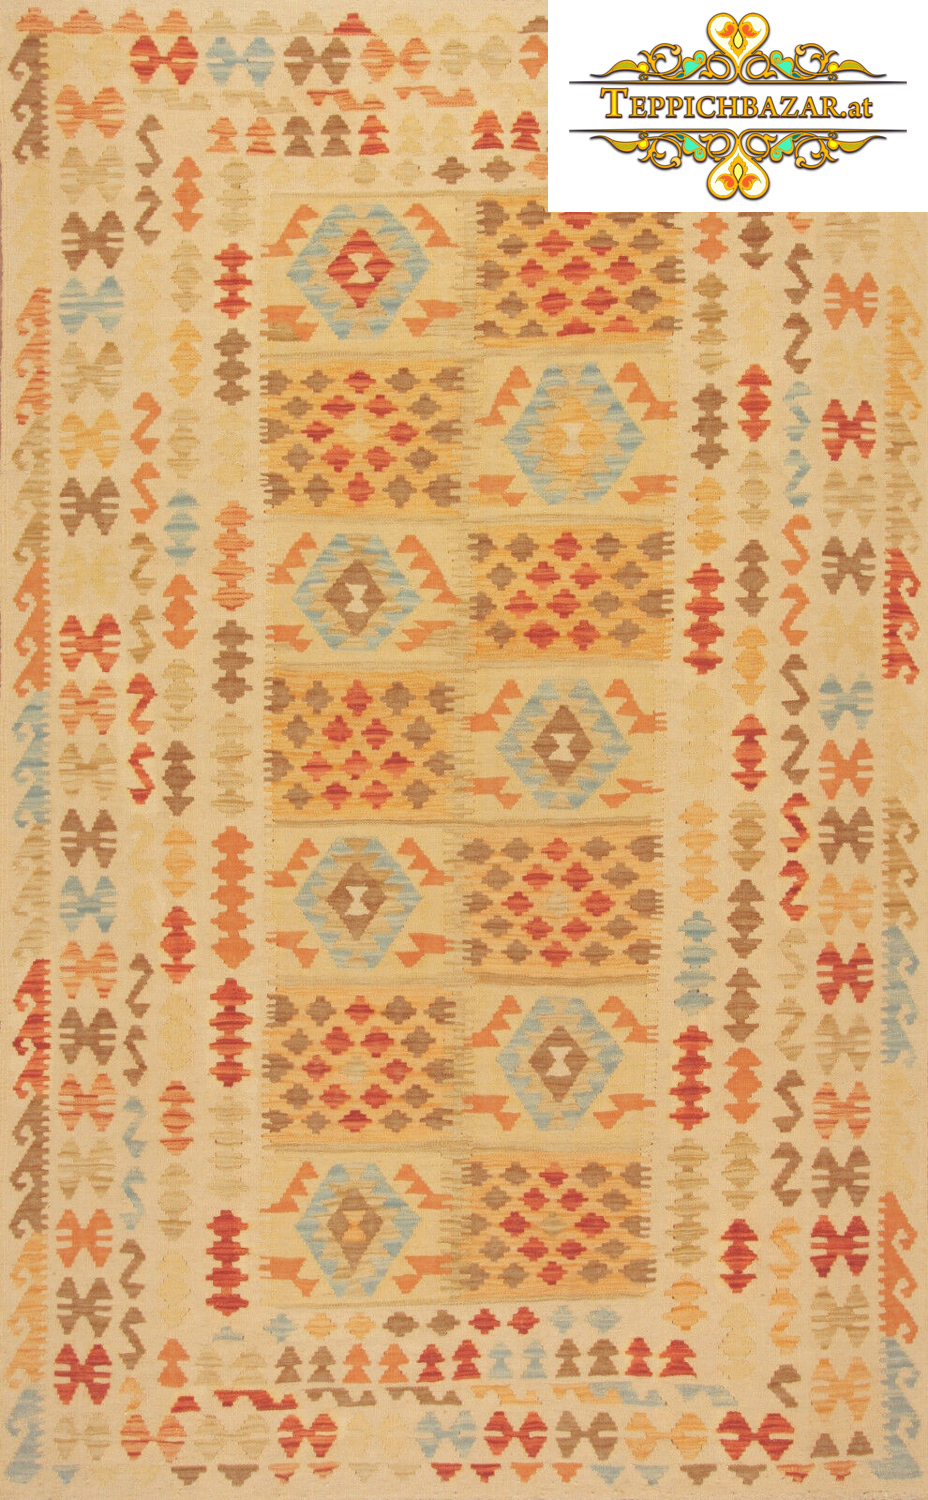 (#H1285) NEW APPROX. 263X162CM HAND KNOTTED AFGHANISTAN AFGHANKELIM AFGHANKELIM, AFGHANISTAN, WOOL, ORIENTAL CARPET, CARPET BAZAR, CARPET, CARPETS, PATTERNS, ZIEGLER, ORIENTAL CARPETS TYPE: AFGHANKELIM WITH SIGNATURE ORIGIN: AFGHANISTAN FLOOR: 100% WOOL WITHOUT BYM BLEND NECKLACE: 100% COTTON SIZE: 263X162CM BOTH SIDES CONDITION: NEW PERSIAN RUG ORIENTAL RUG